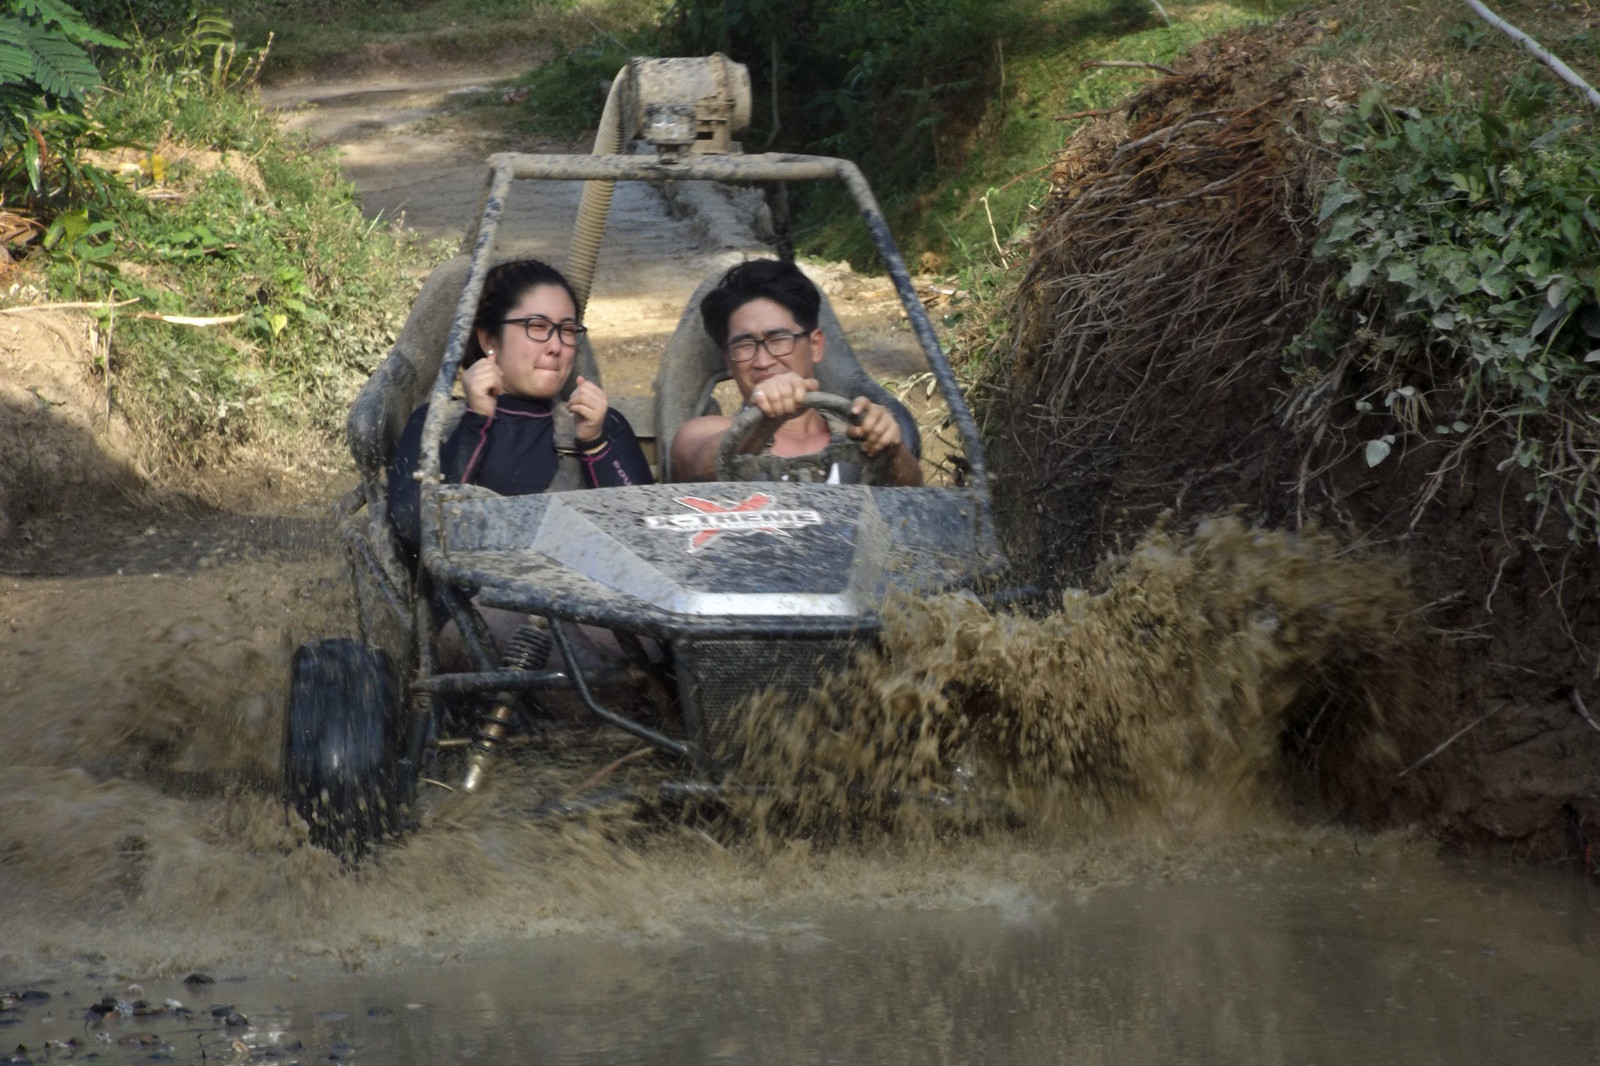 Couples having a great time driving Mud Kart in Extreme Sports Philippines Adventure Park in Puerto Galera.